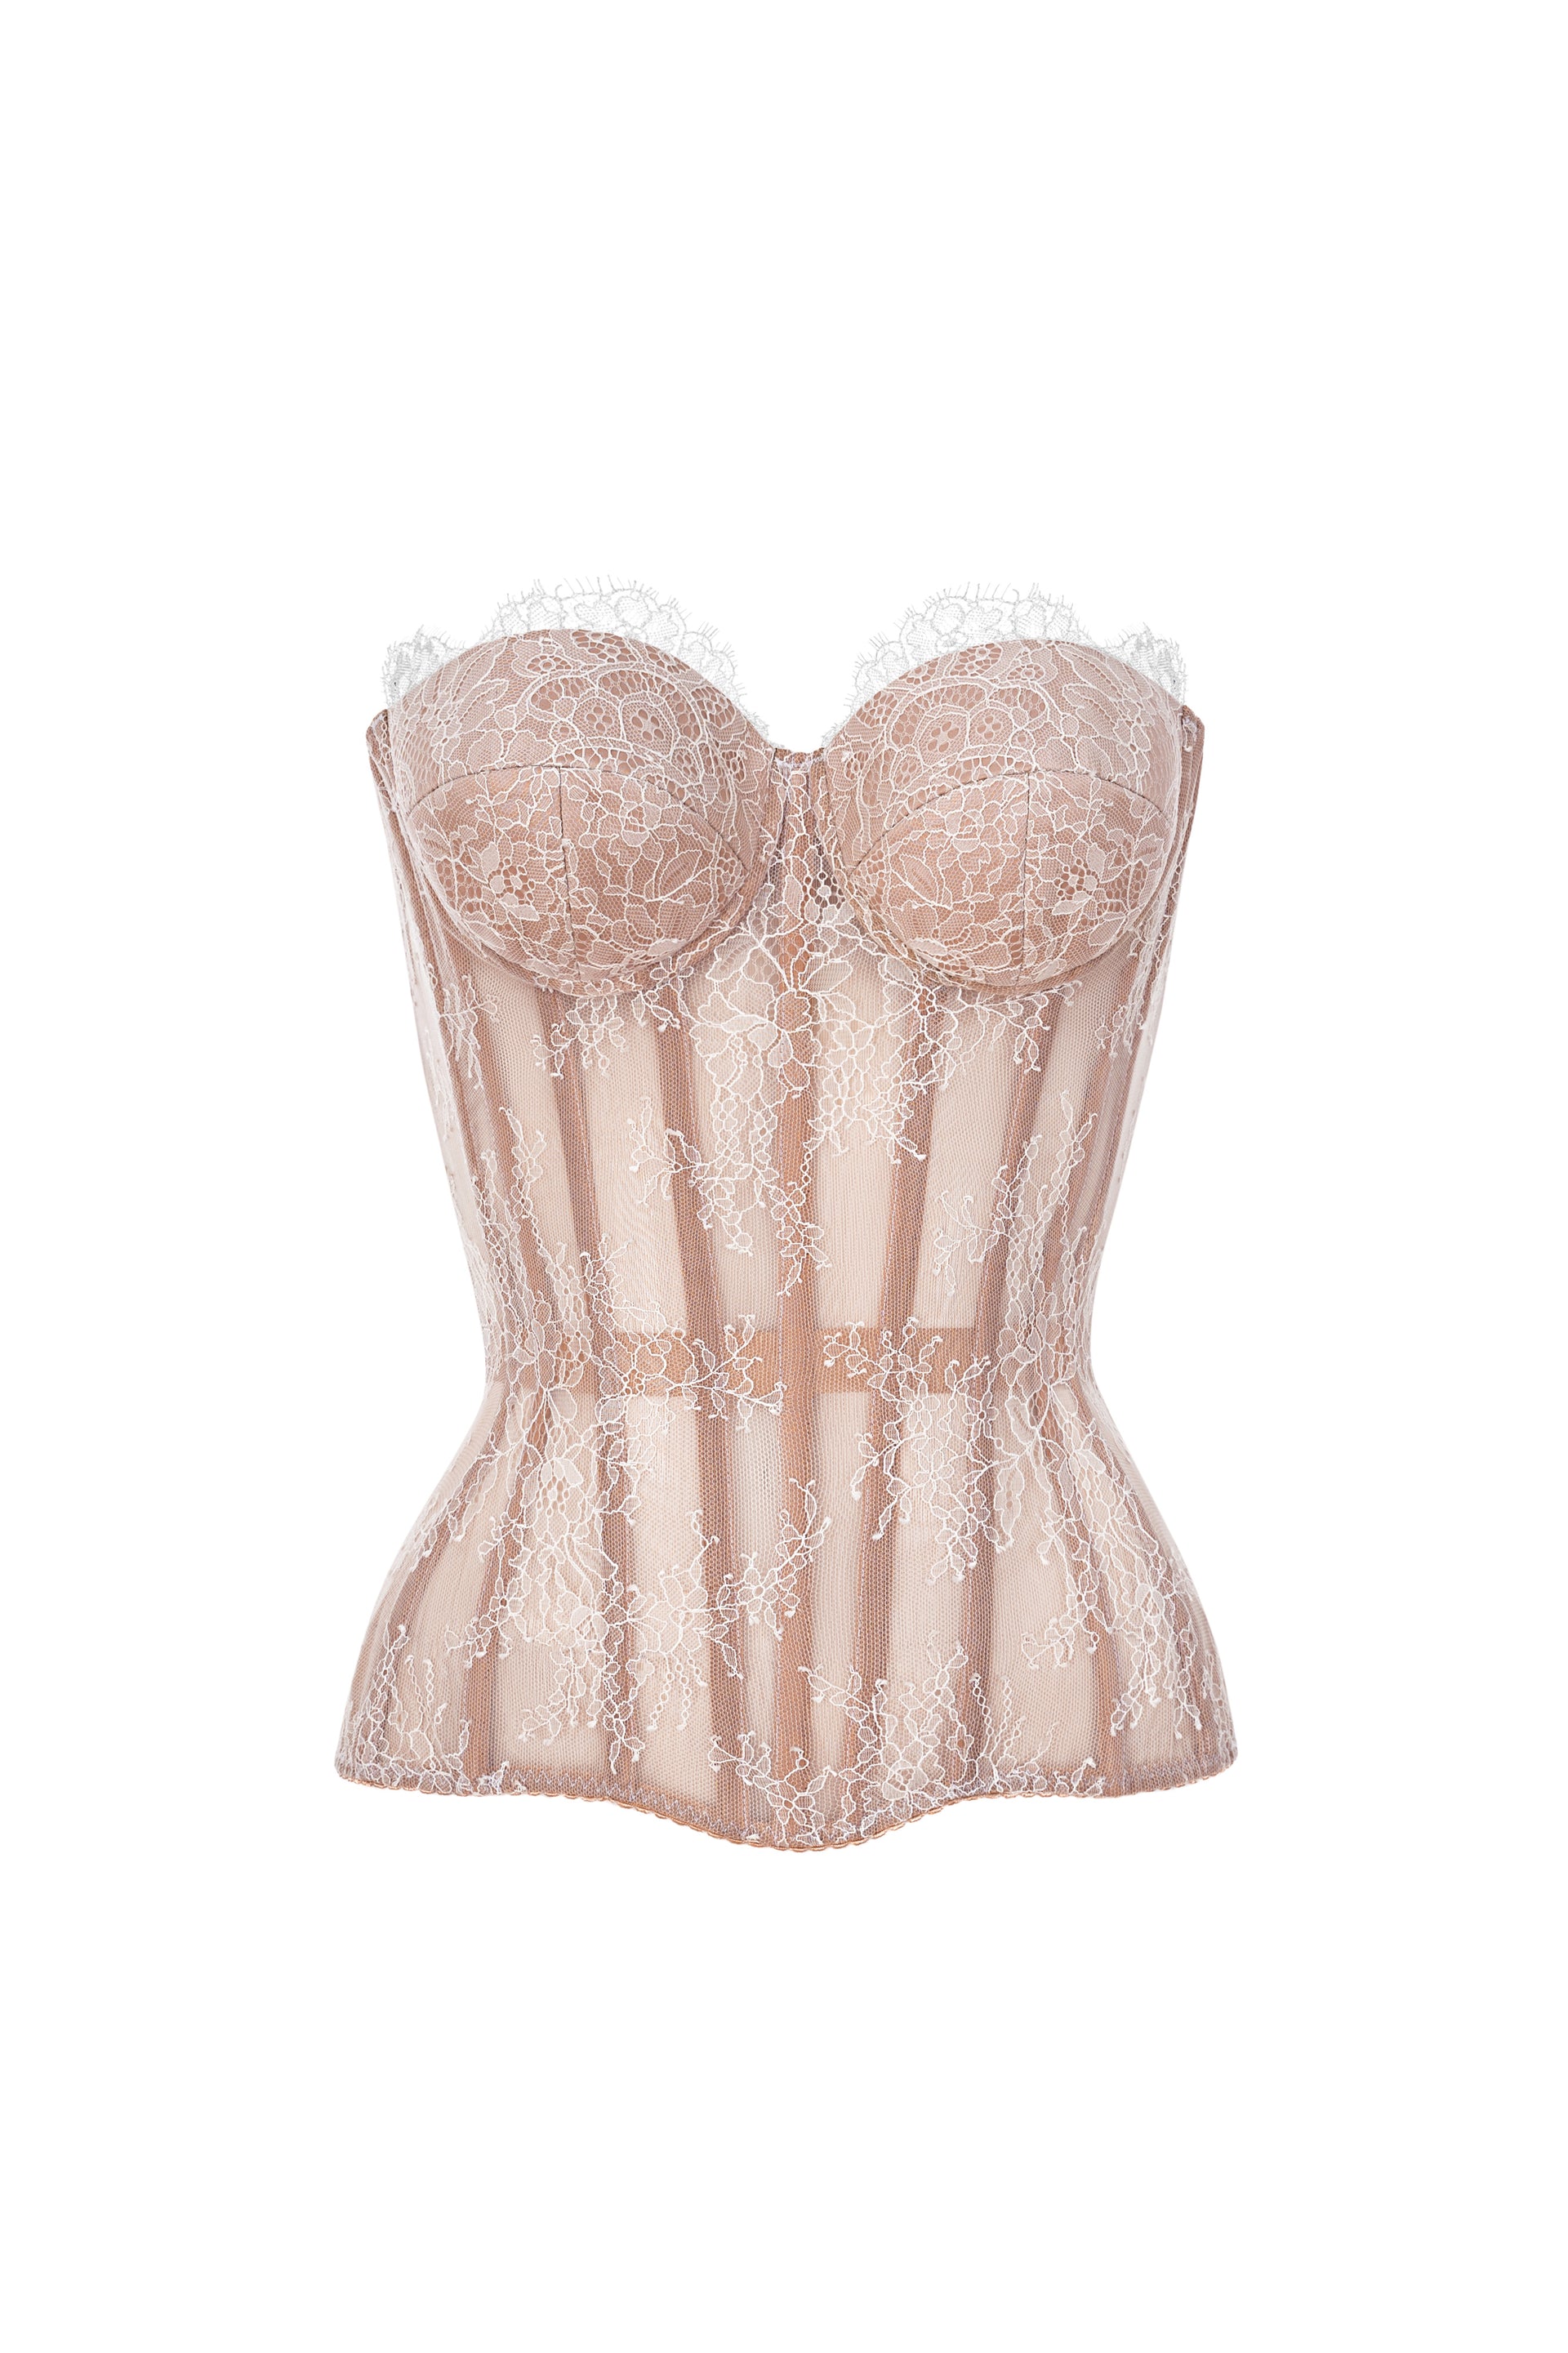 Lace beige corset with cups